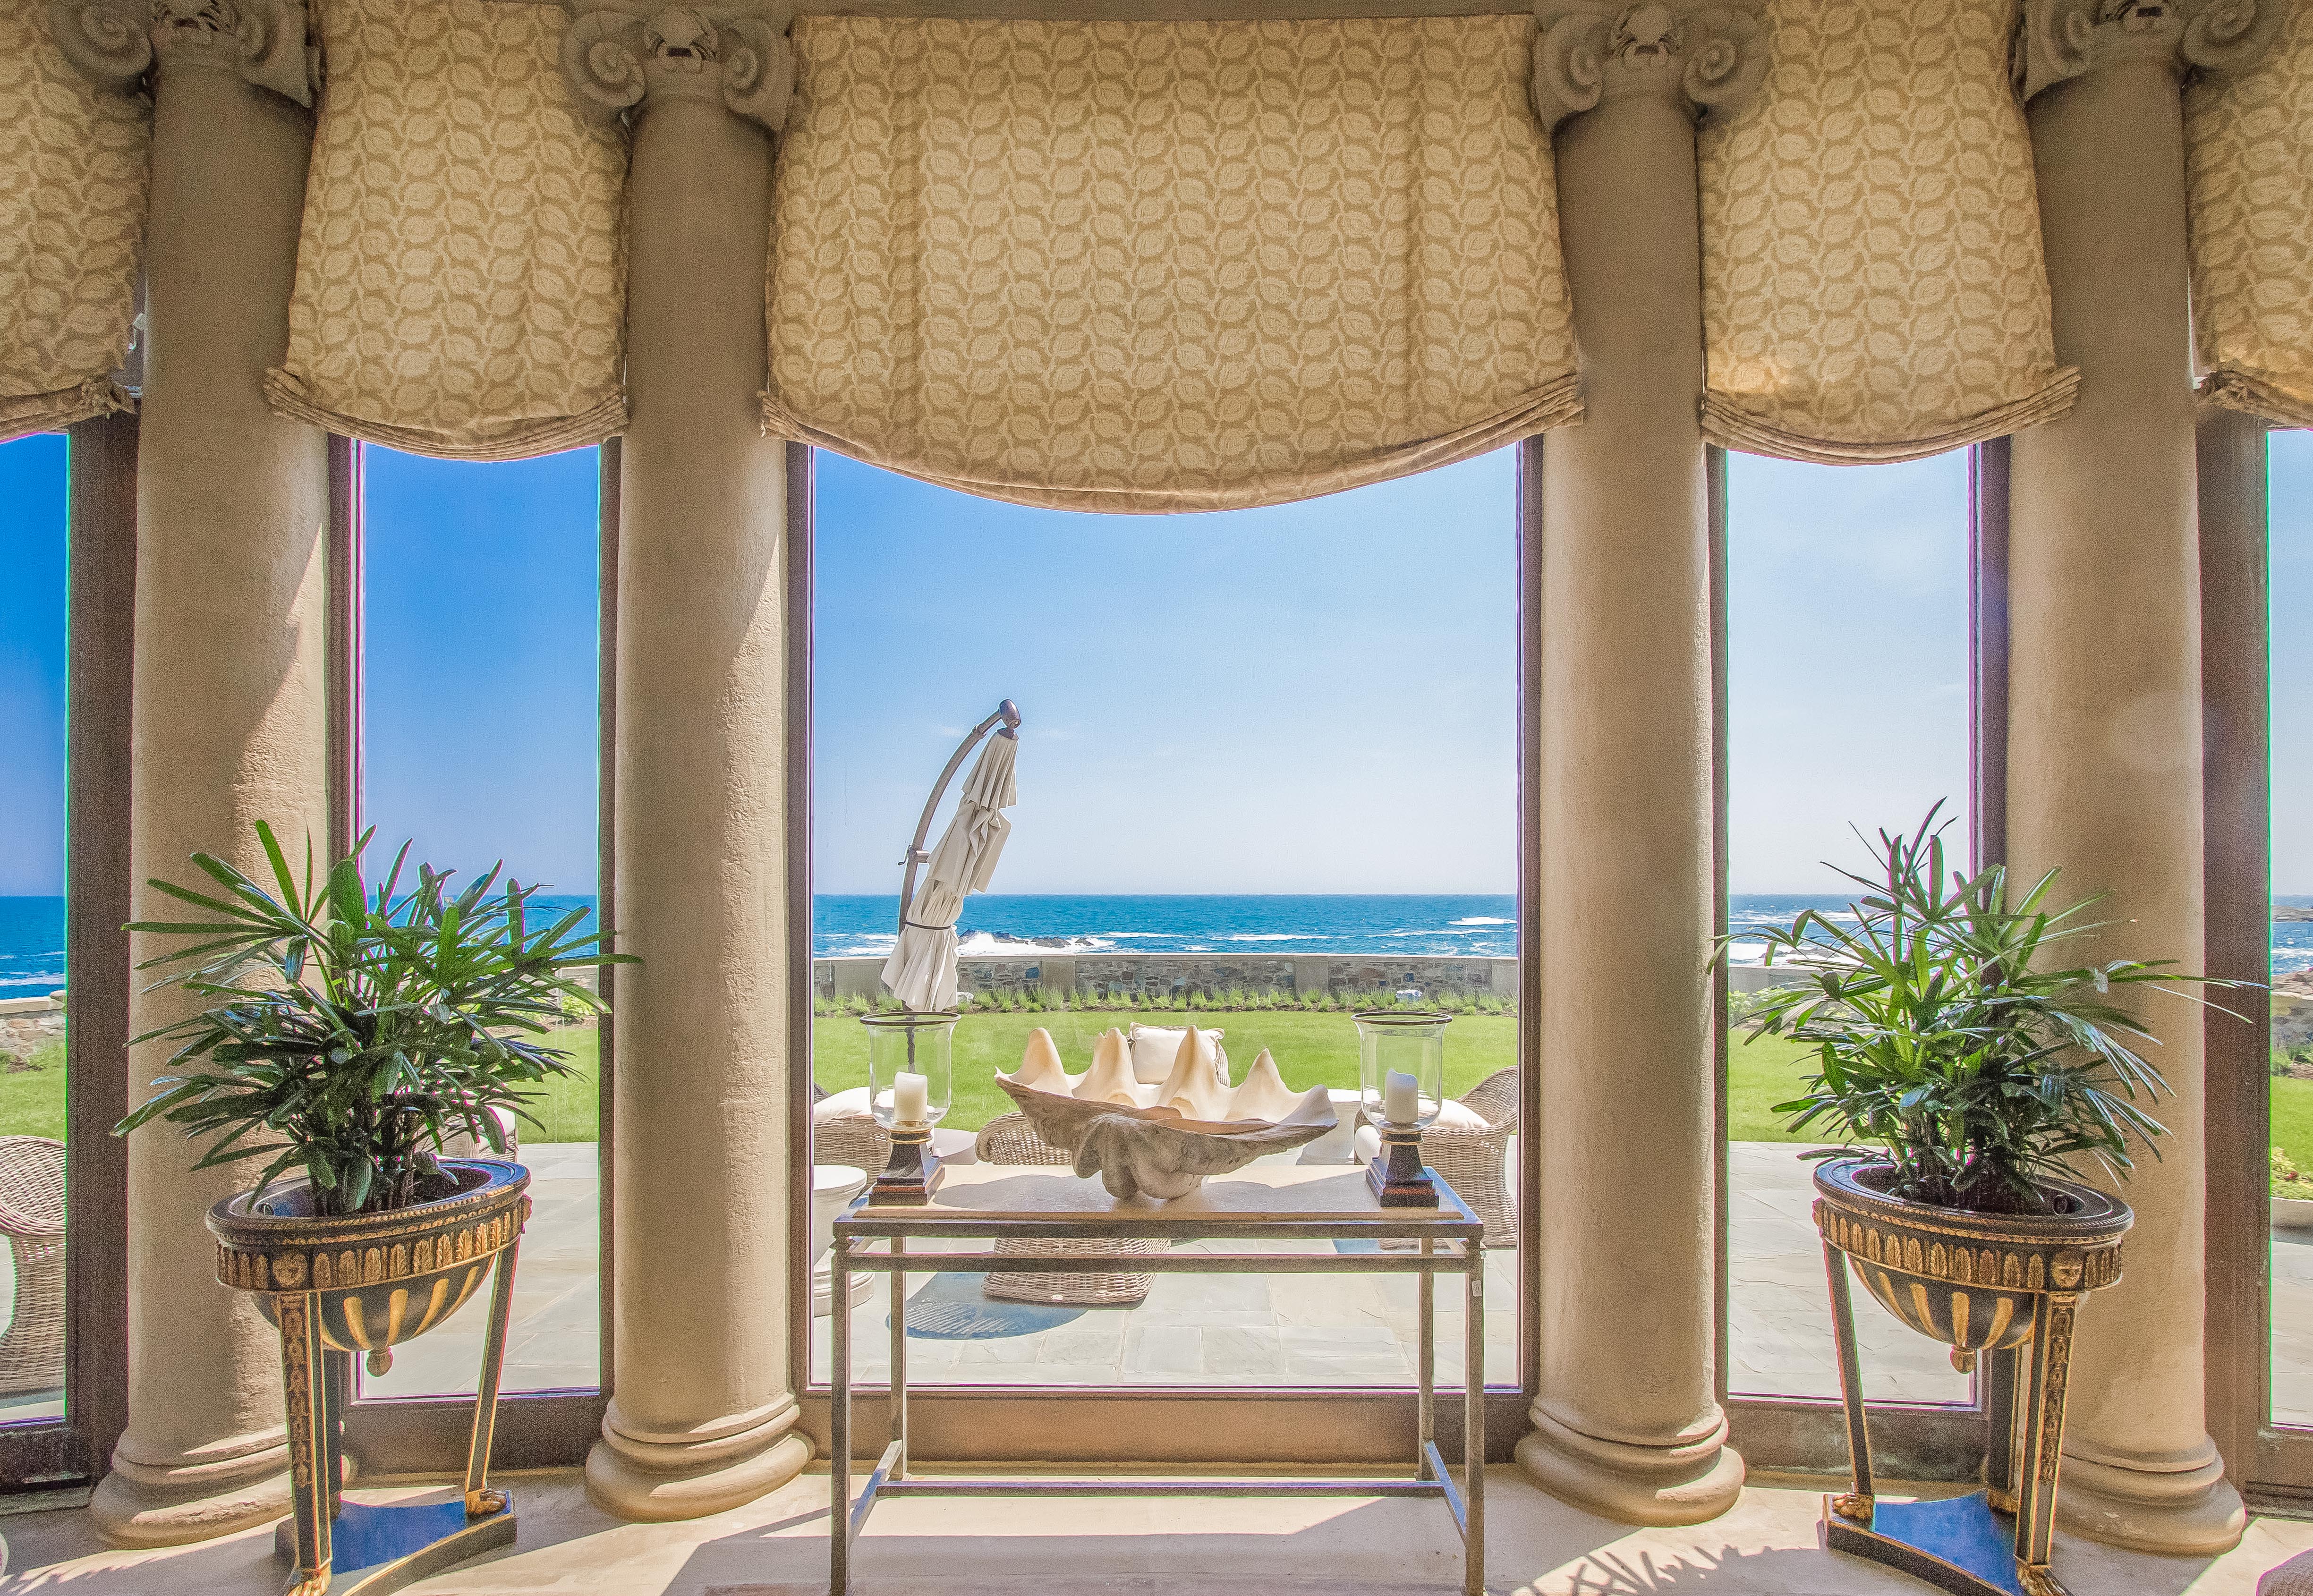 Got $19M? How about a jaw-dropping, historical seaside estate?